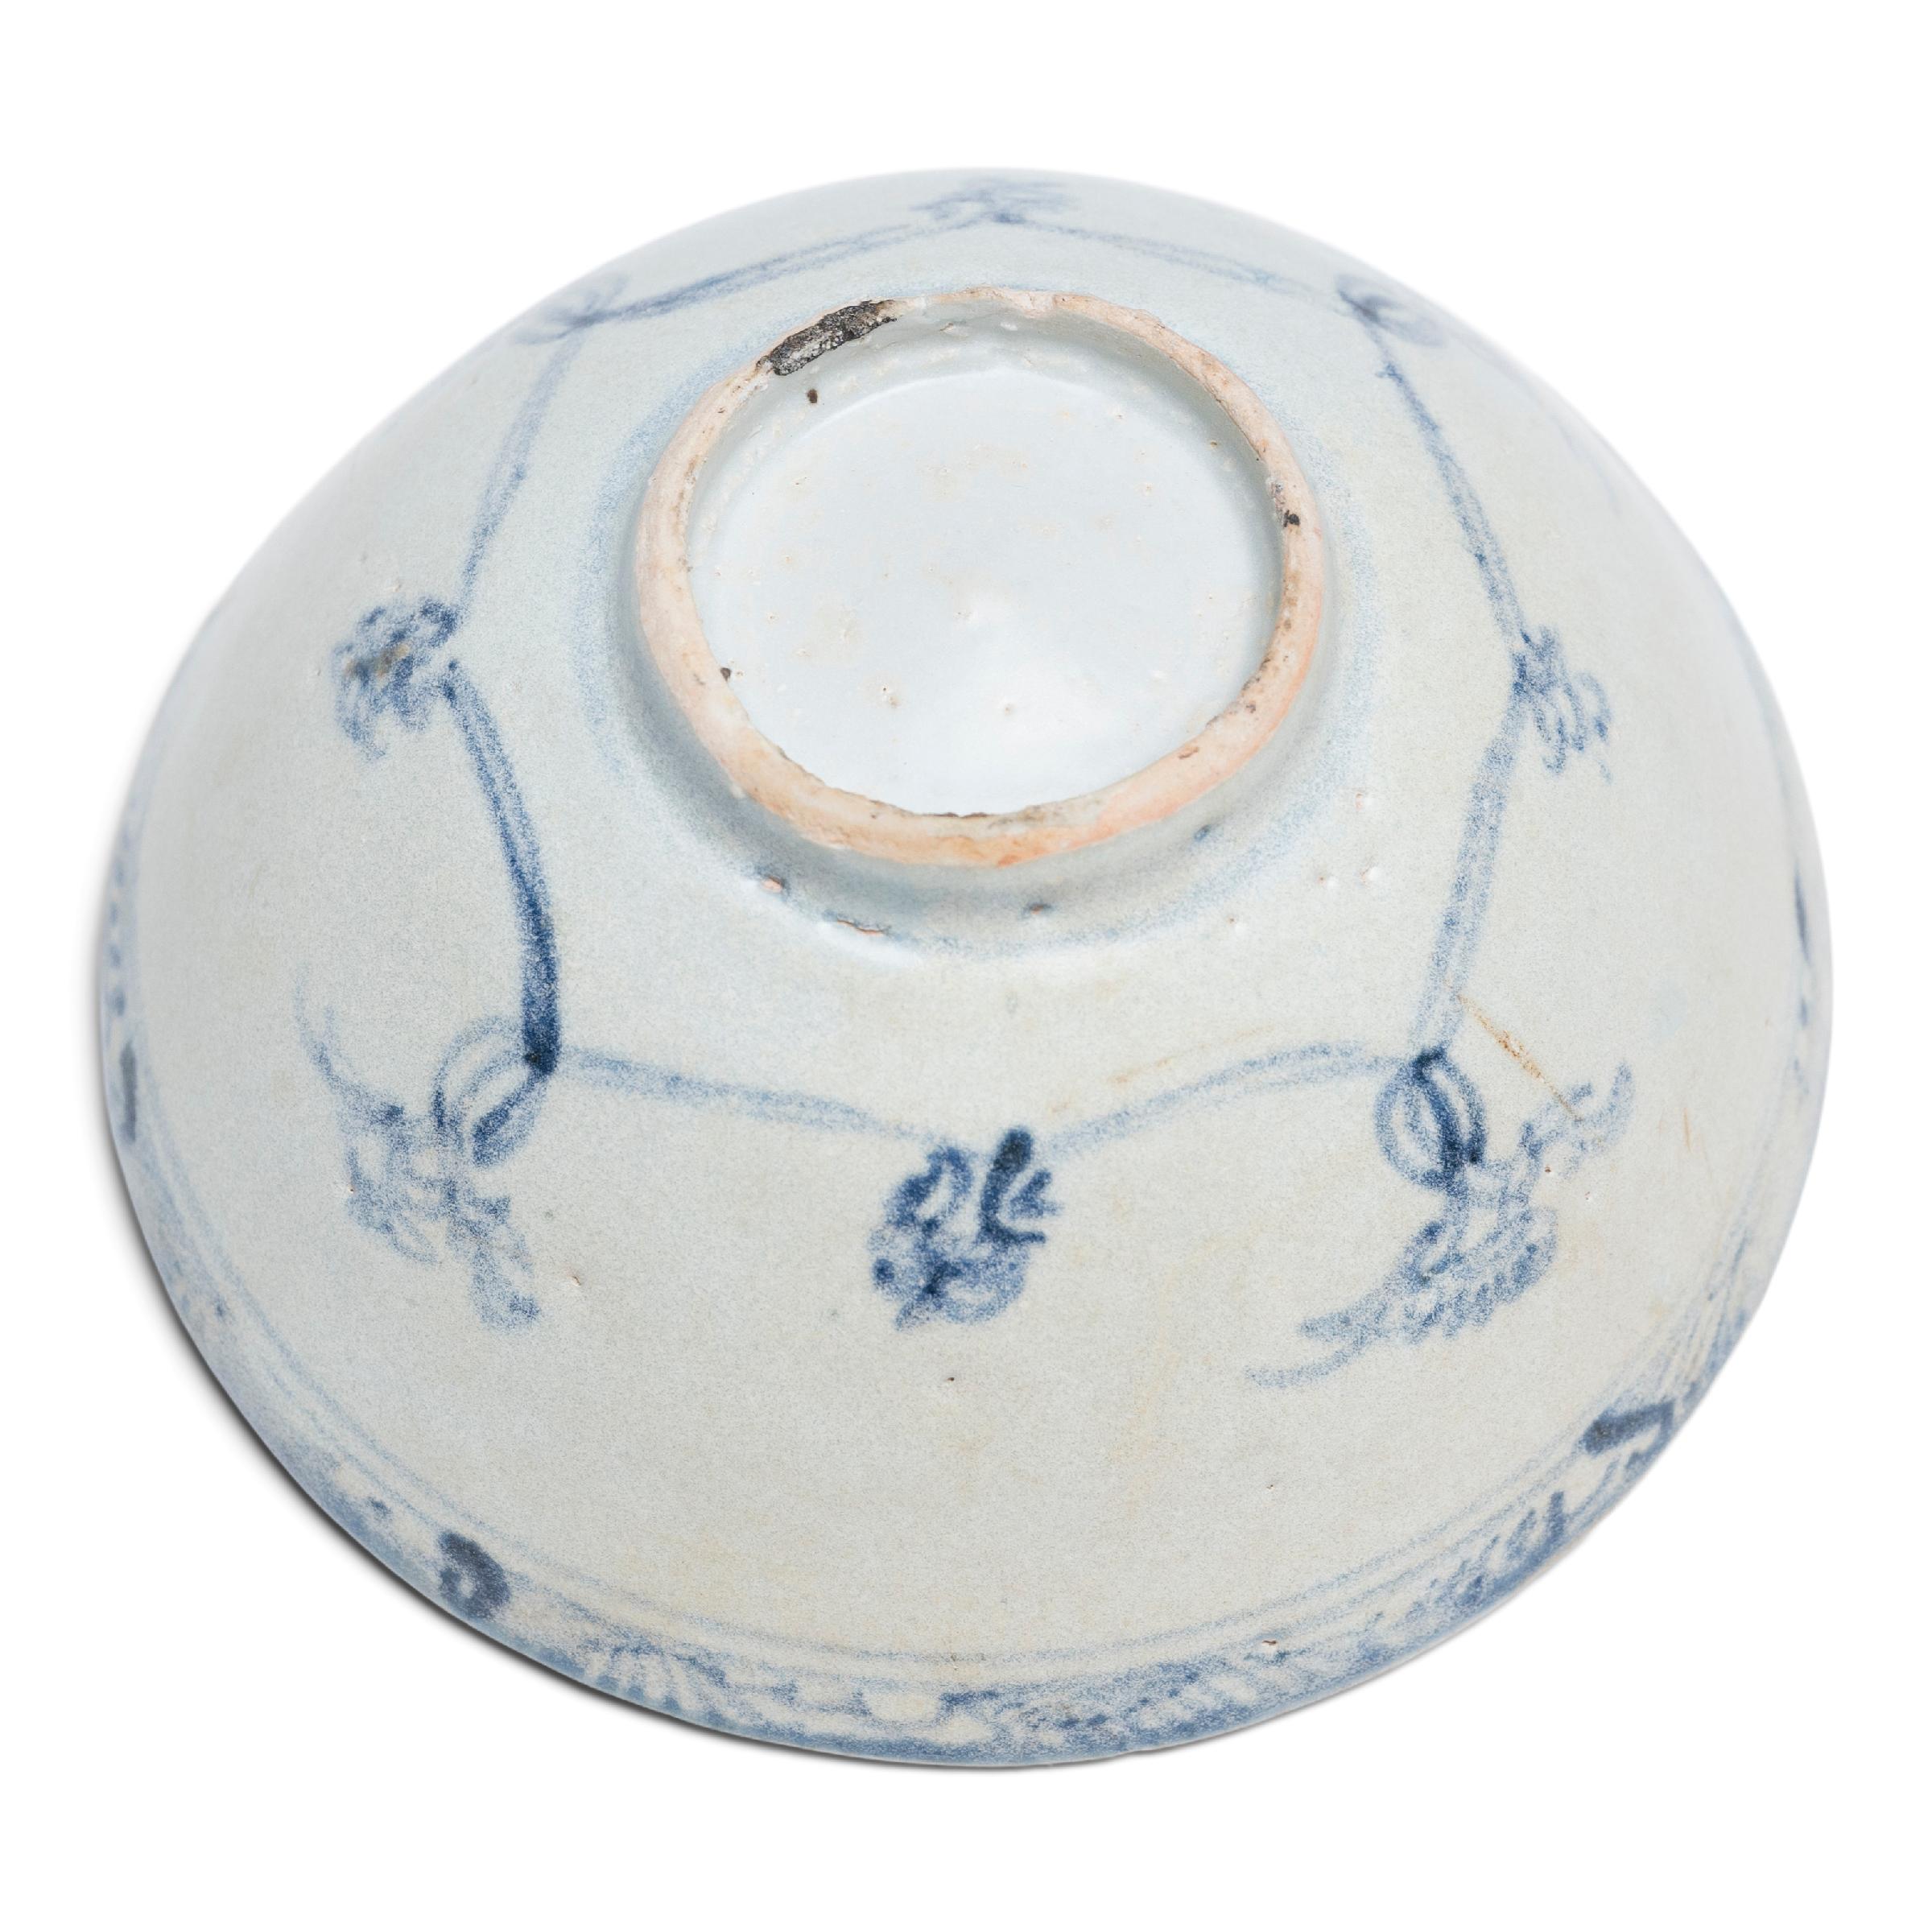 Glazed Chinese Blue and White Ming Shipwreck Bowl, c. 1850